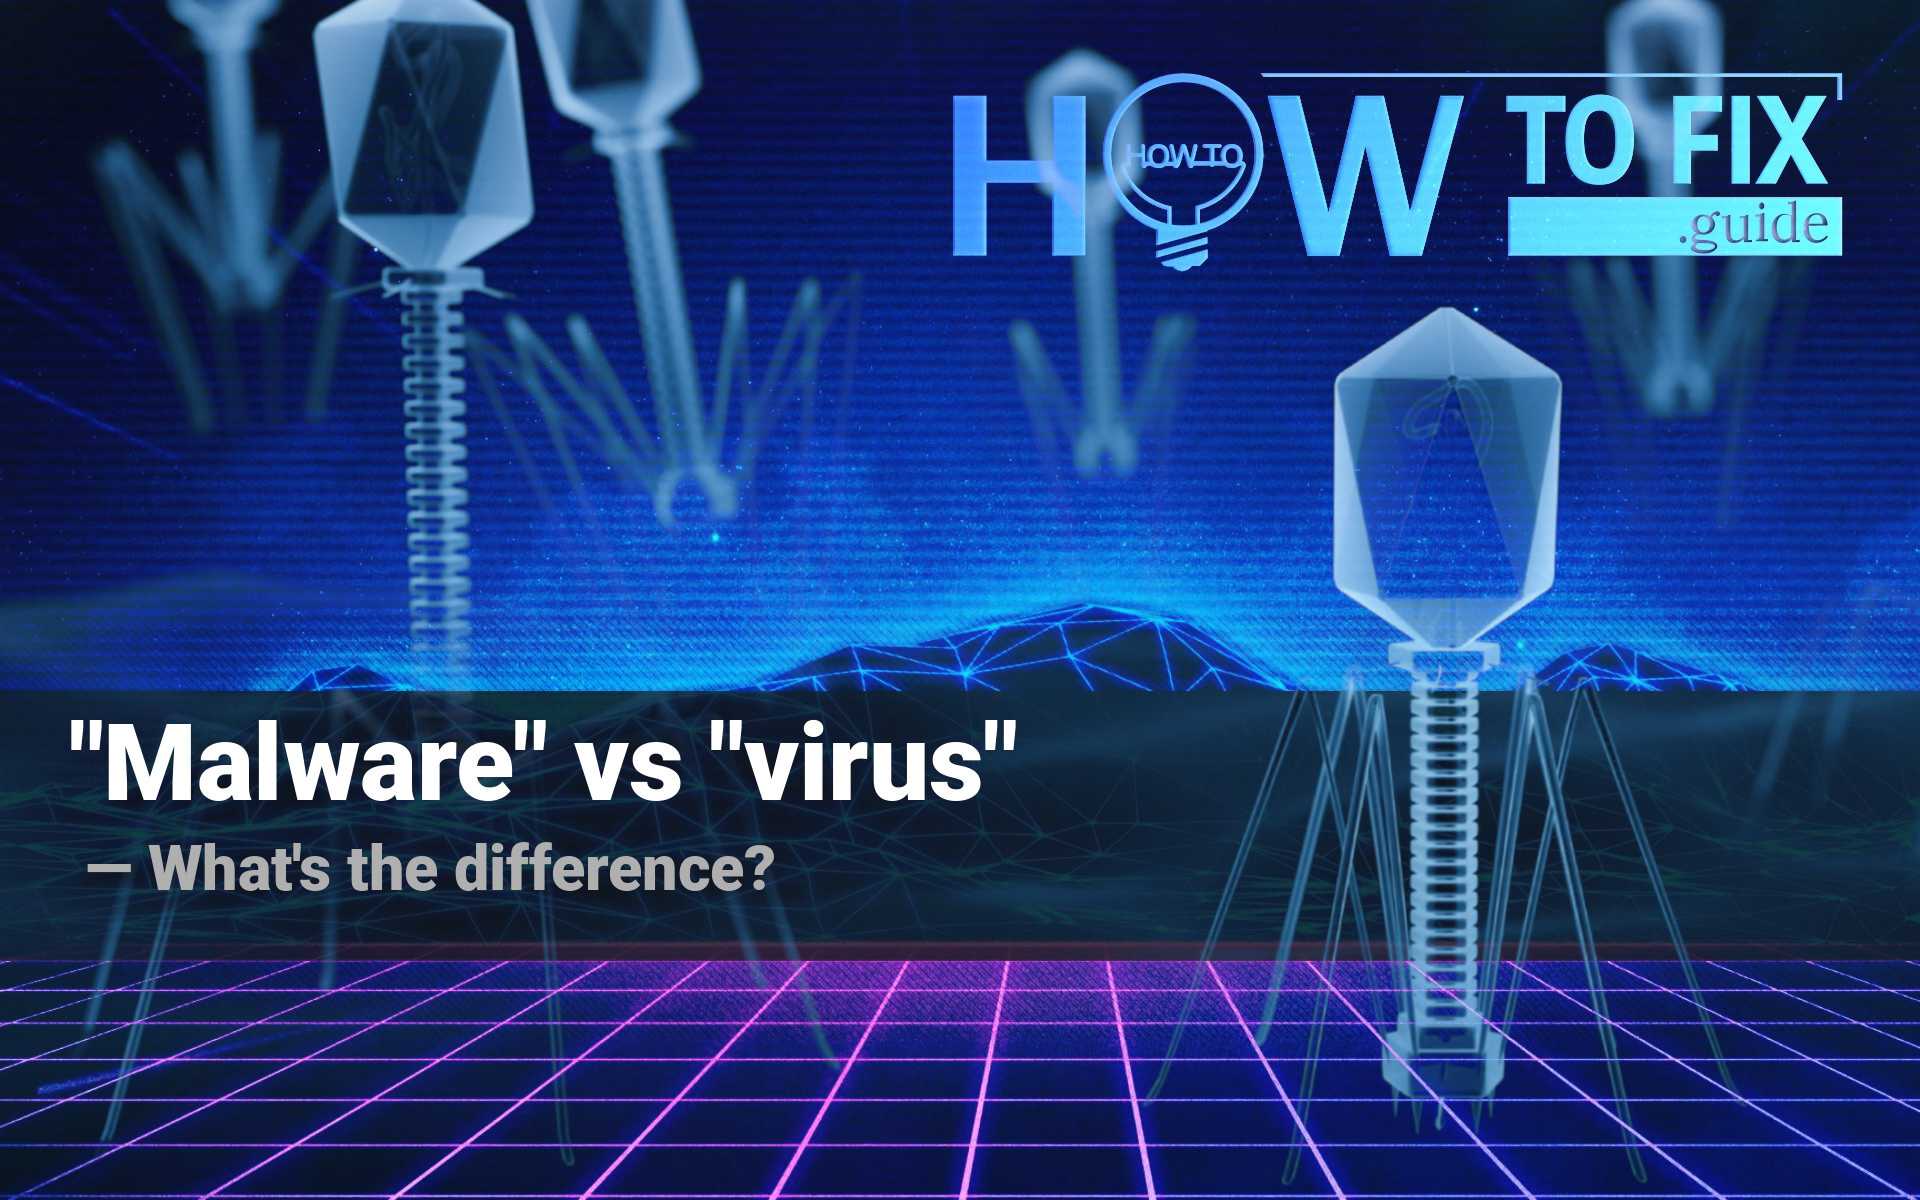 Malware vs virus. What's the difference? 